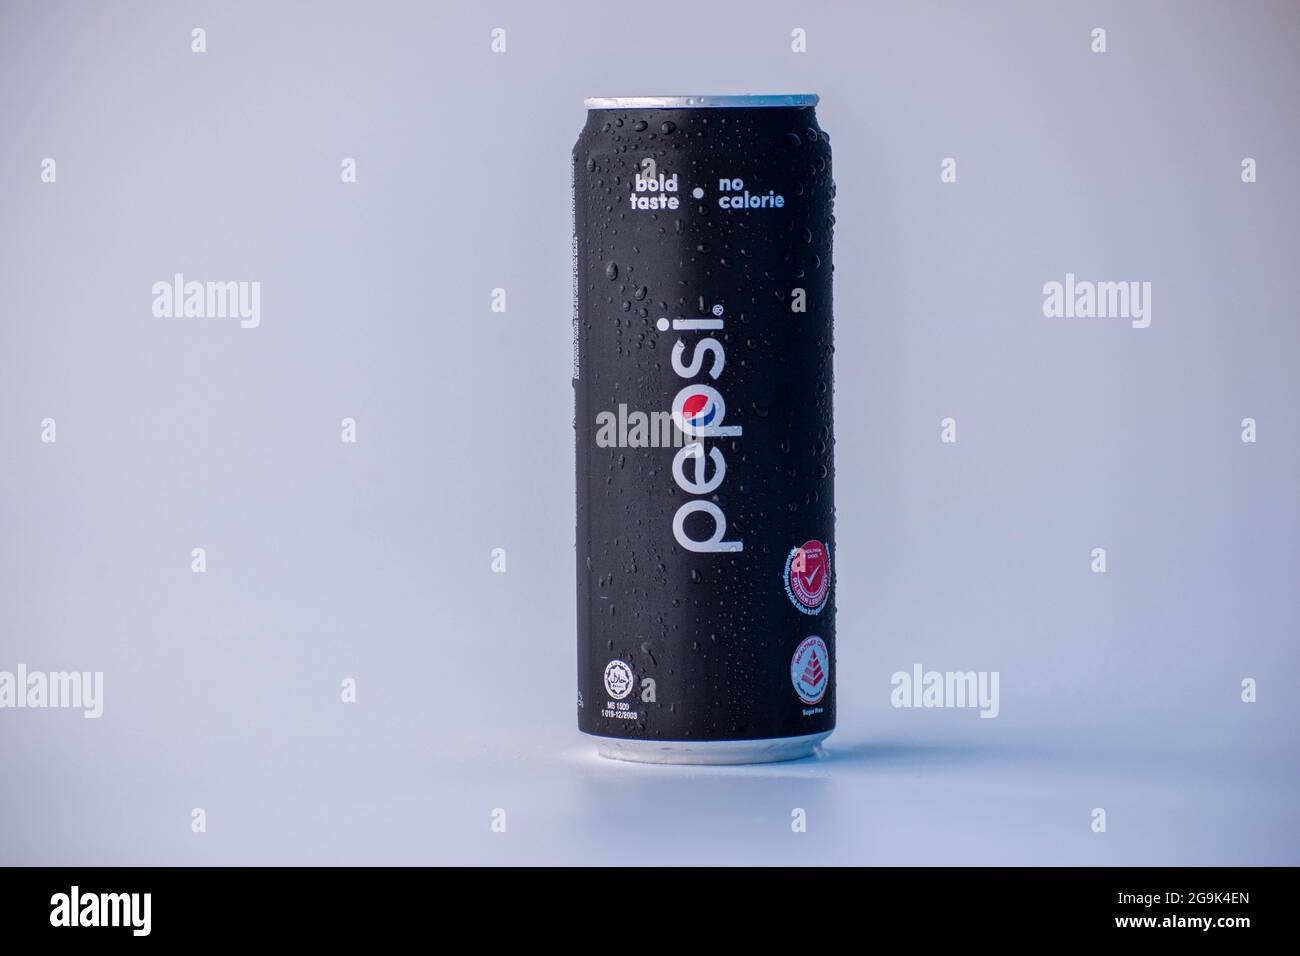 Selangor, Malaysia - July 20, 2021: Pepsi drink can with fresh look ...